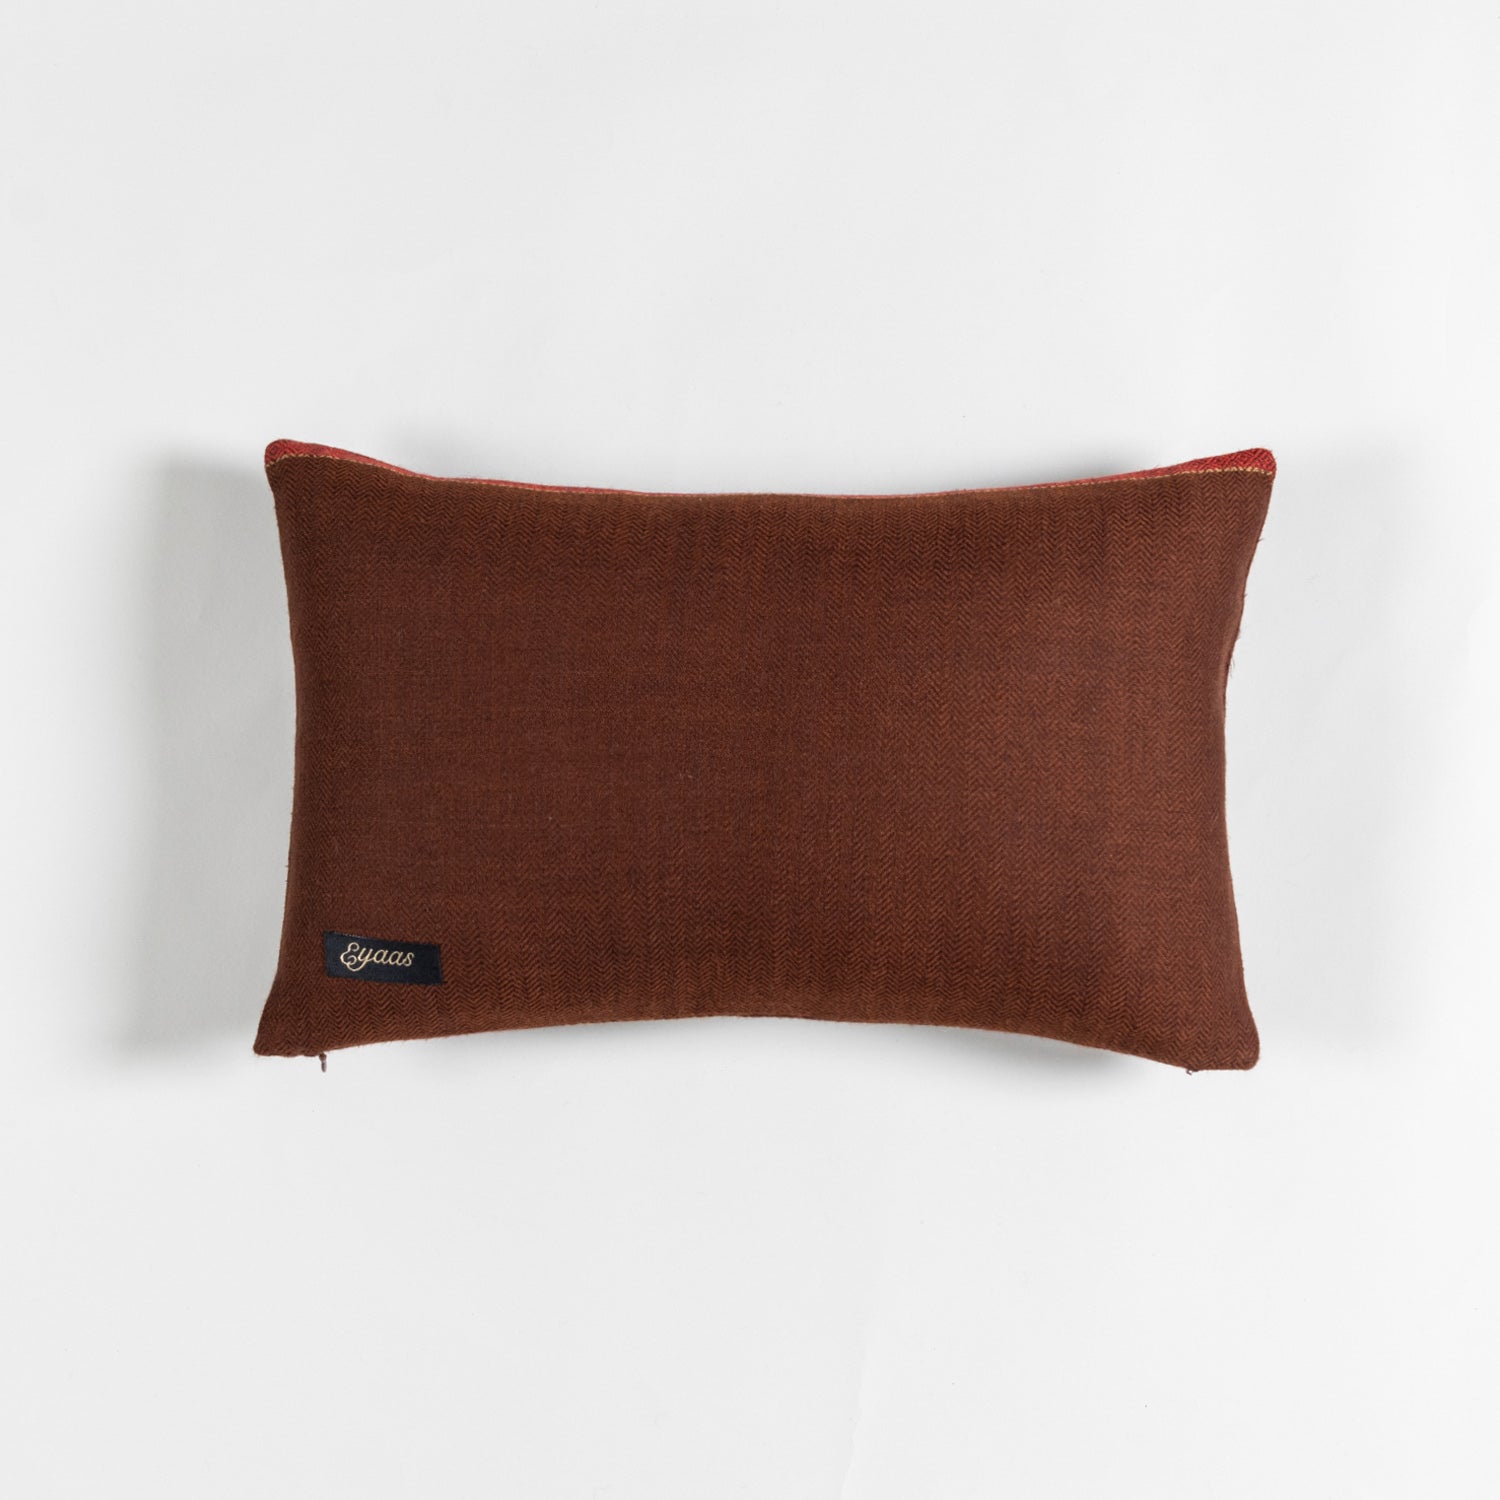 Handwoven Upcycled Chocolate Brown Wool & Oak Silk Cushion Cover - 12x18